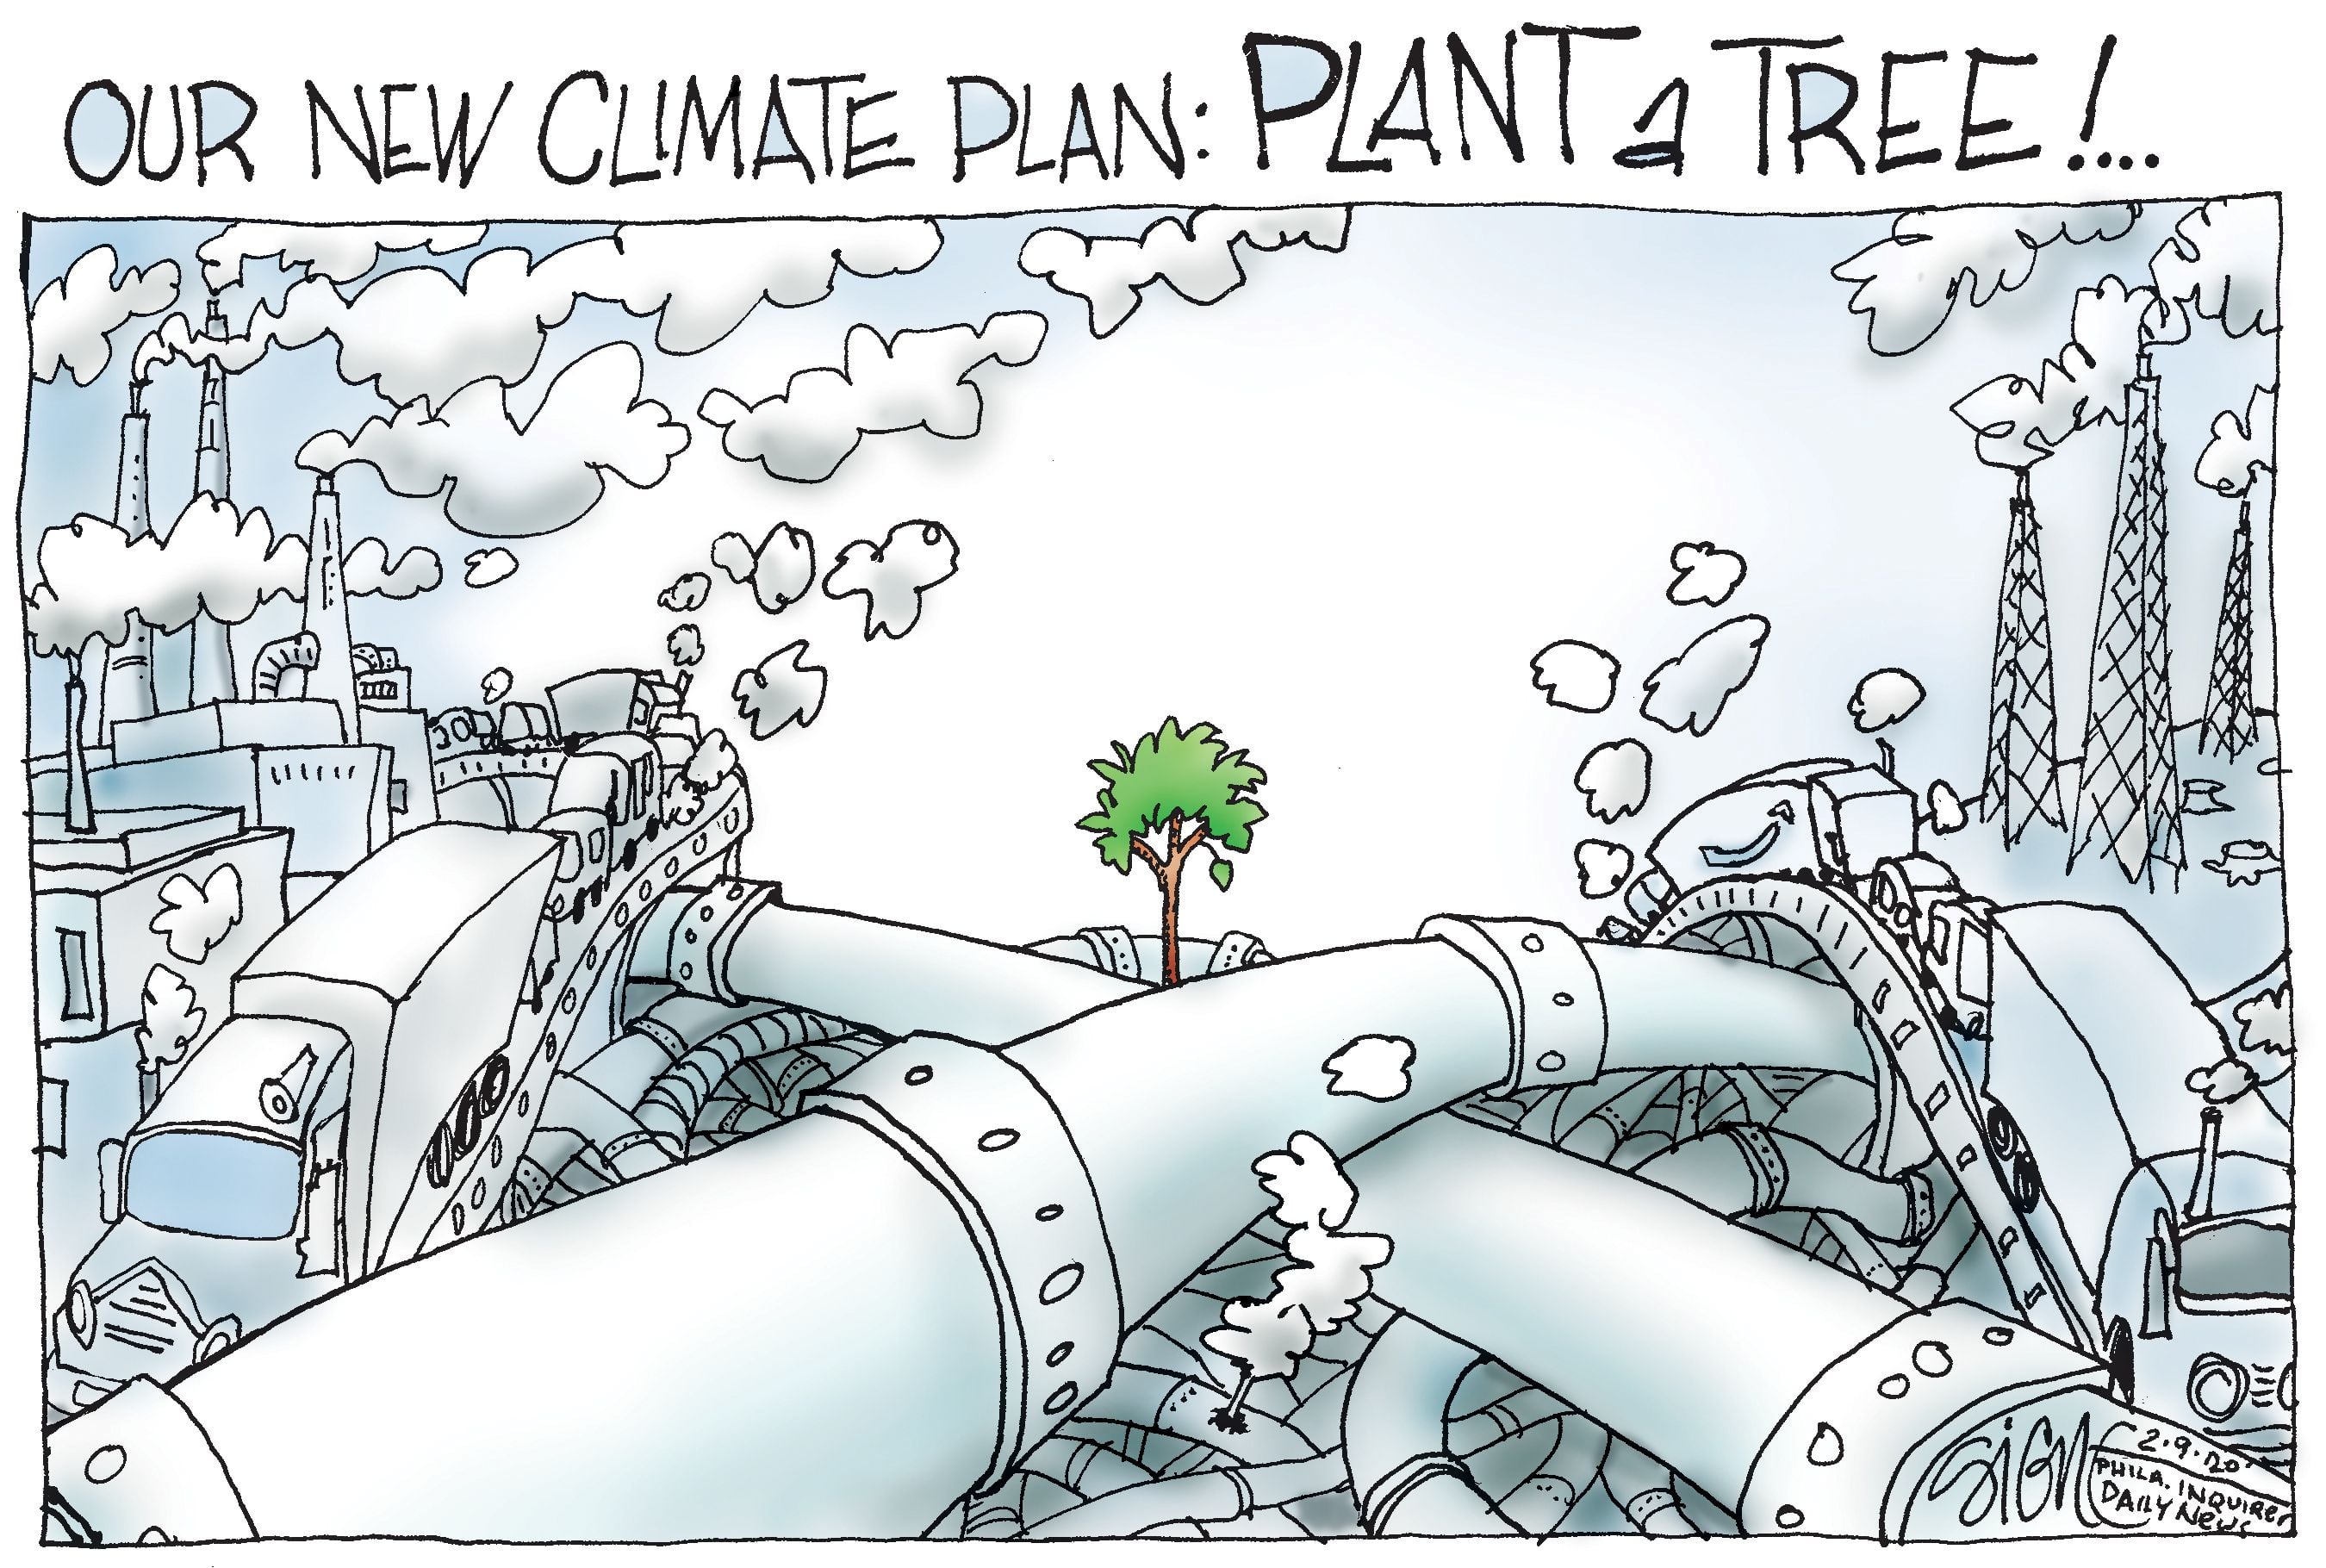 Political Cartoons: Trees to stop climate change?